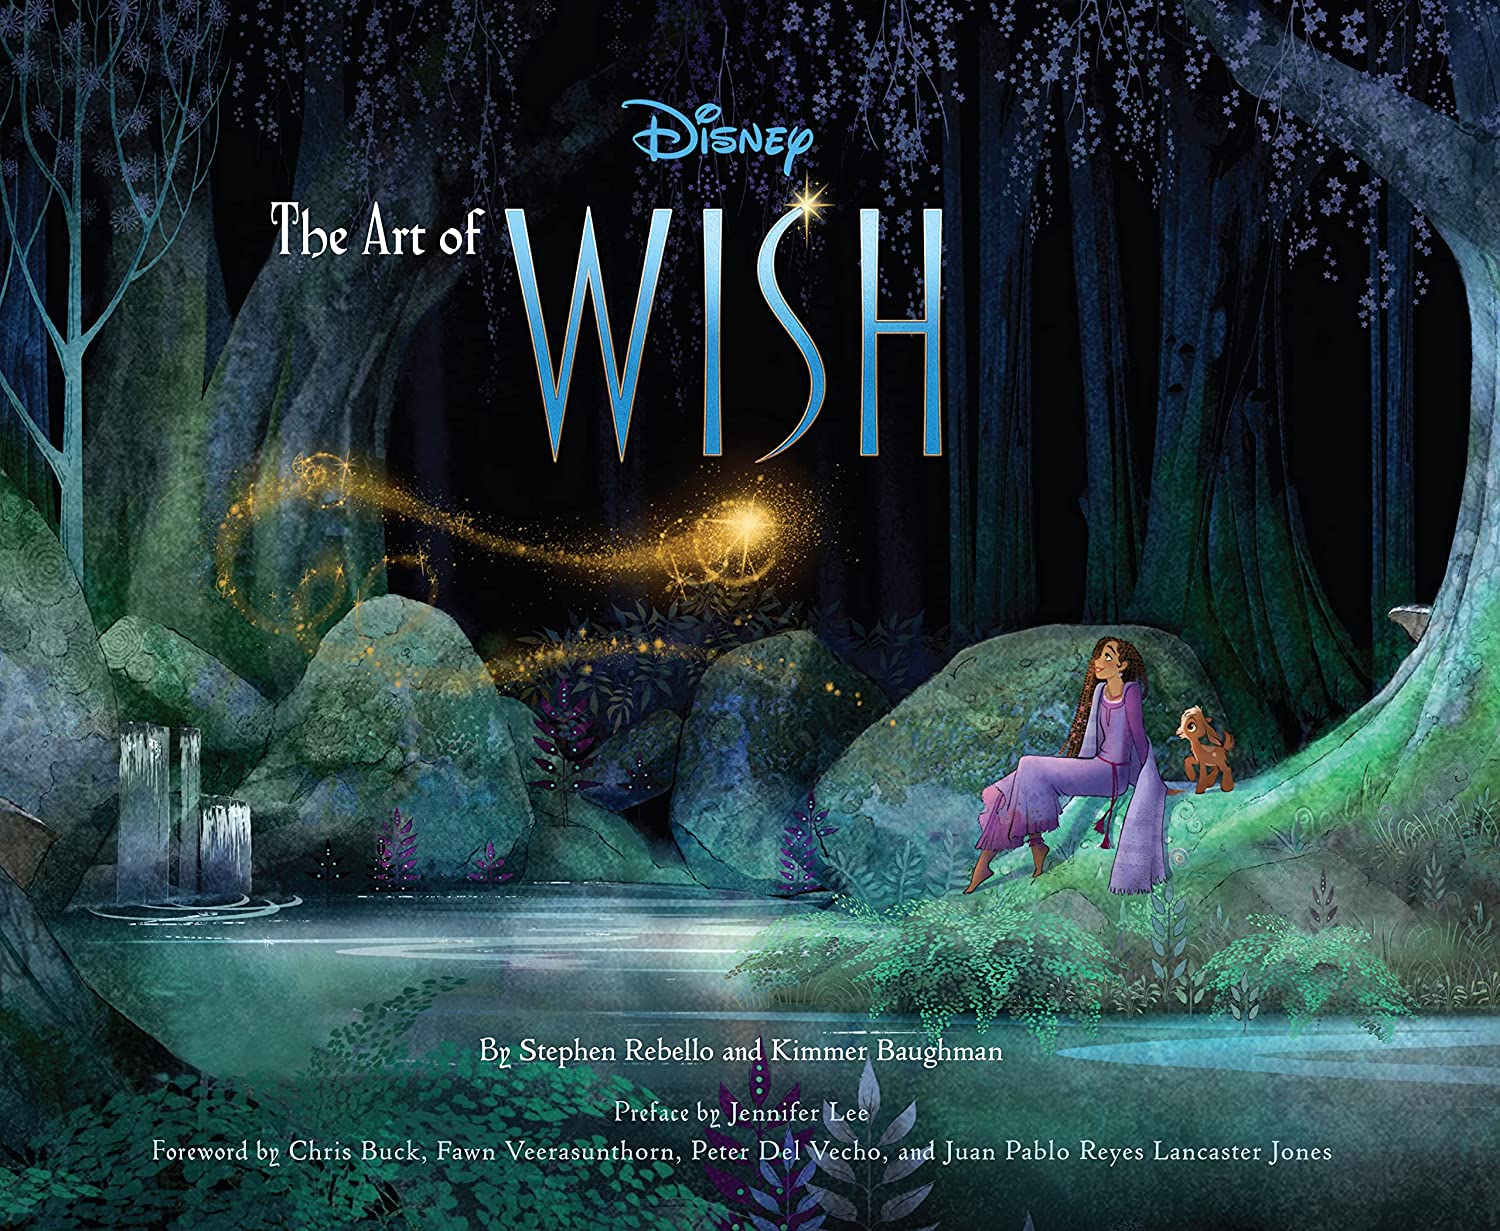 Wish' Storybook Opening Inspired by 'Snow White' and 'Sleeping Beauty